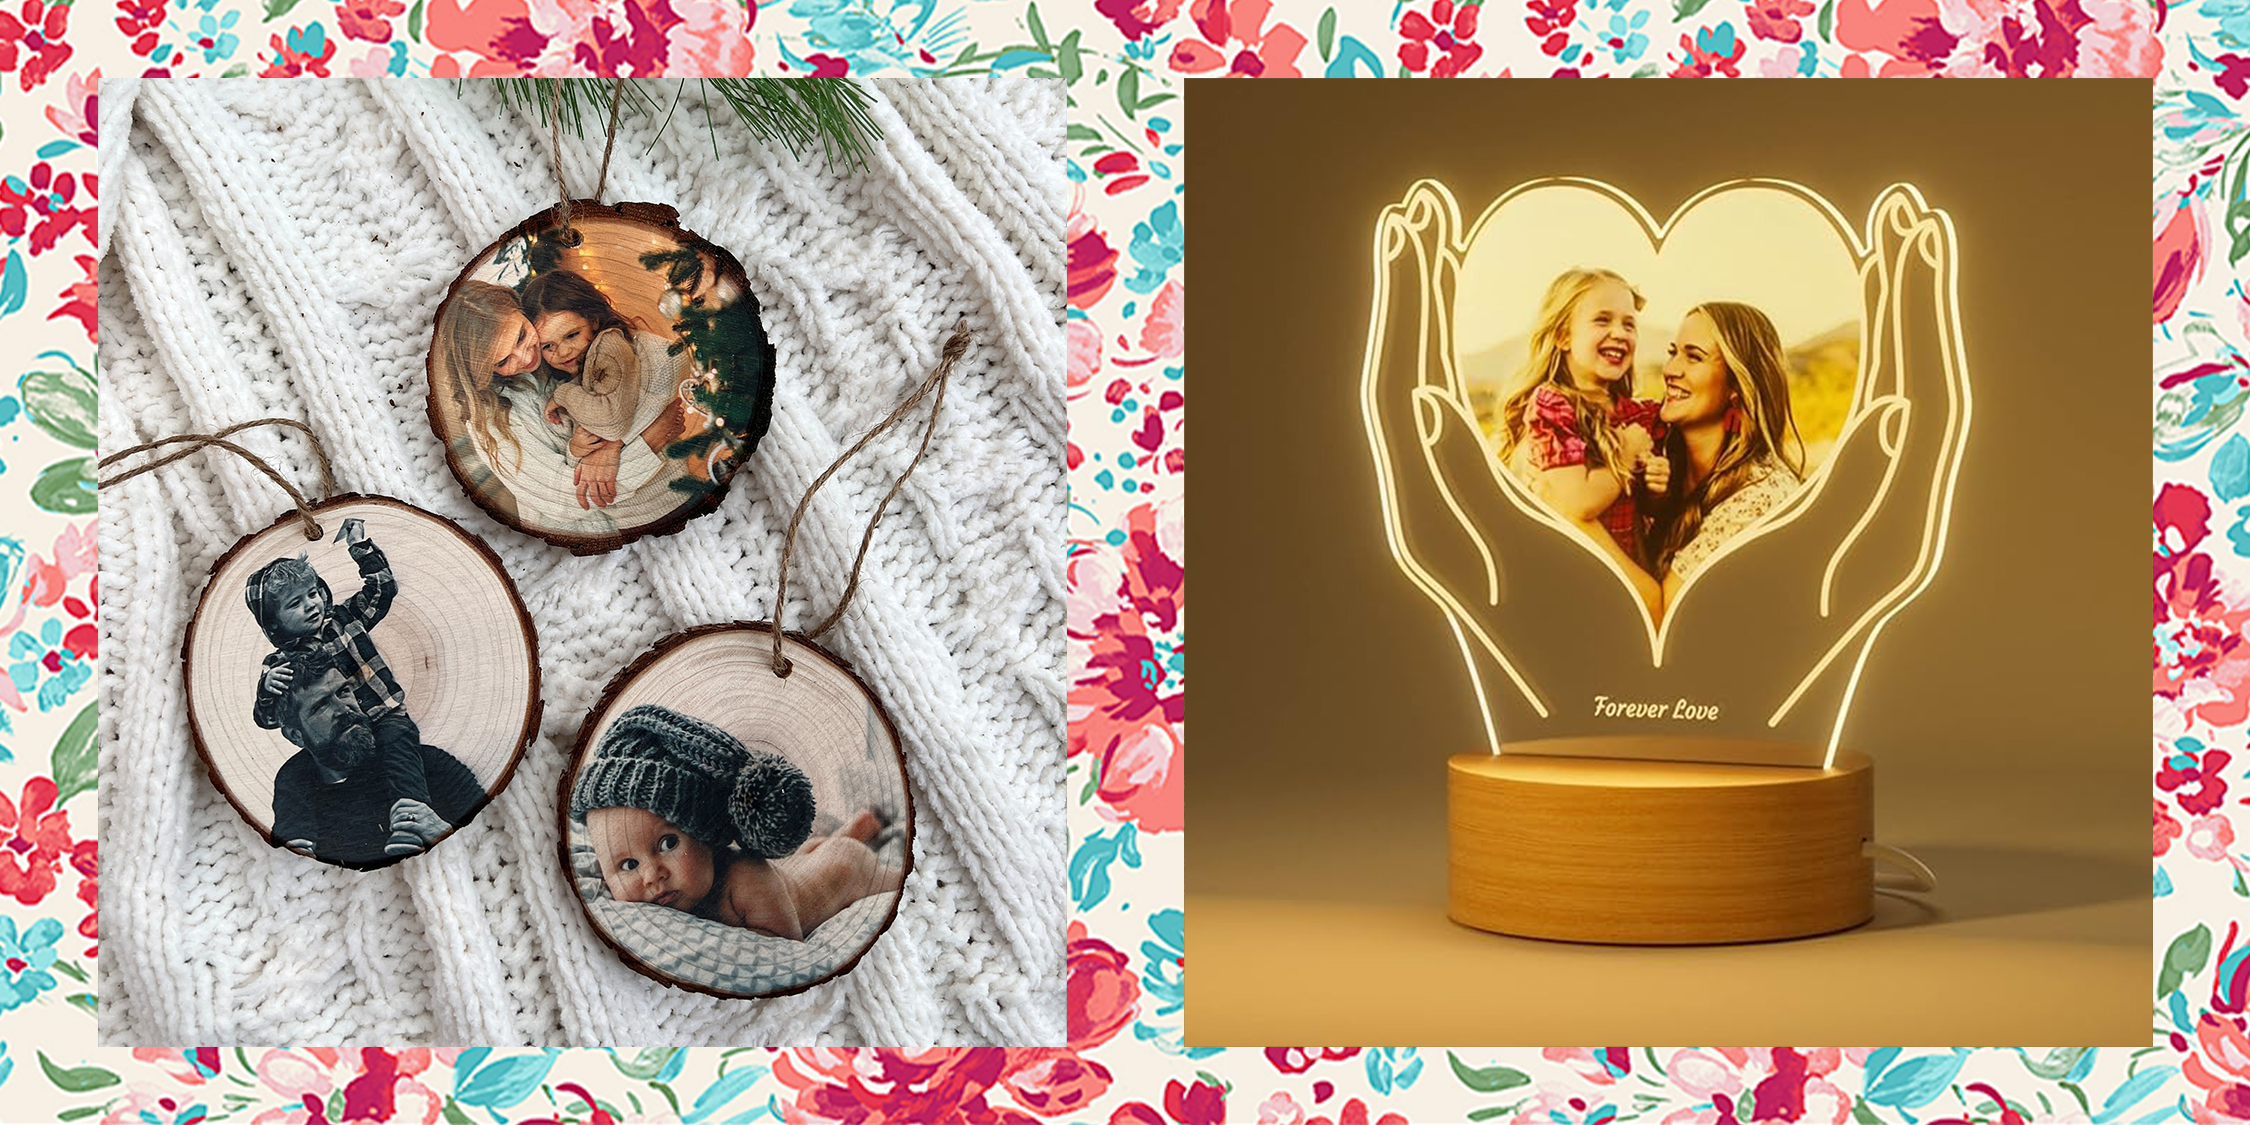 15 Picture Gift Ideas for Boyfriend - Personalized Photo Gifts – Legacybox